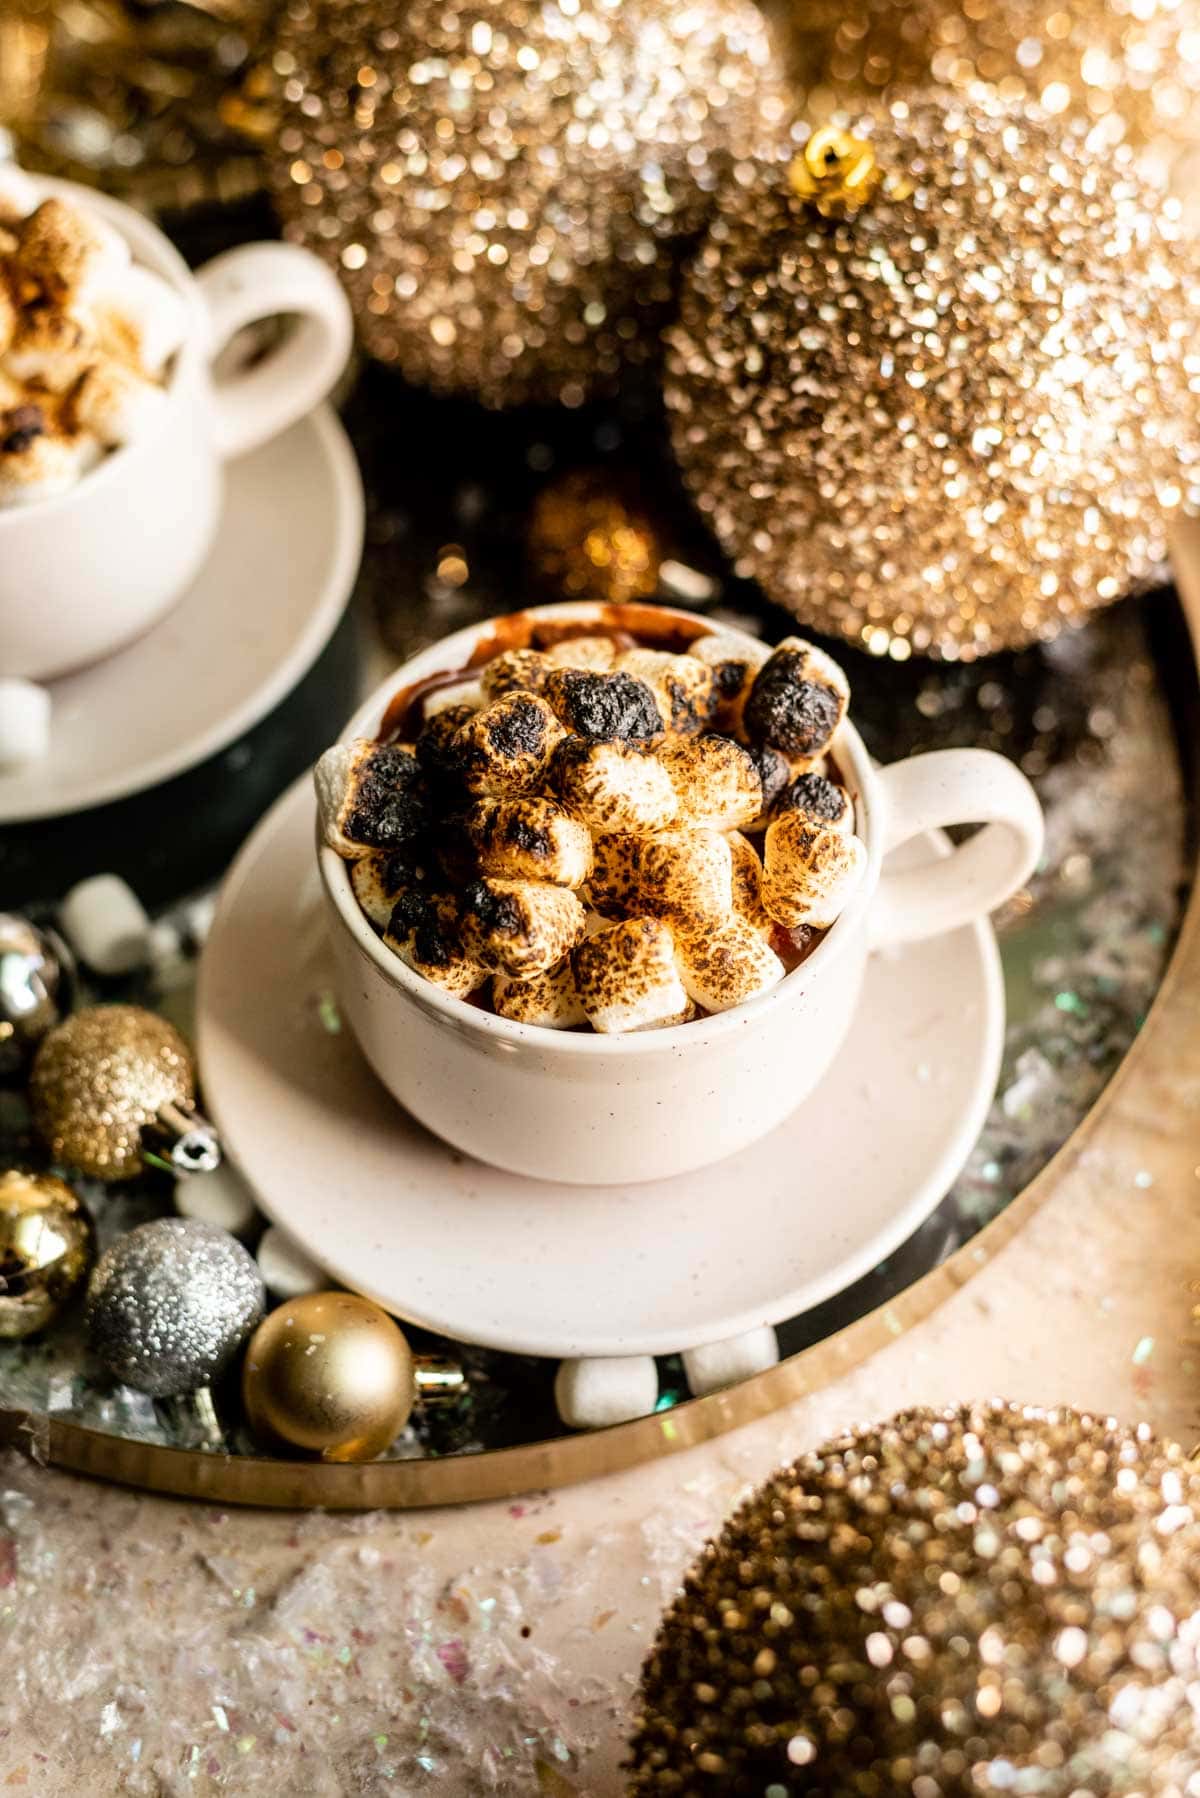 French hot chocolate topped with toasted marshmallows in a white mug with a saucer.